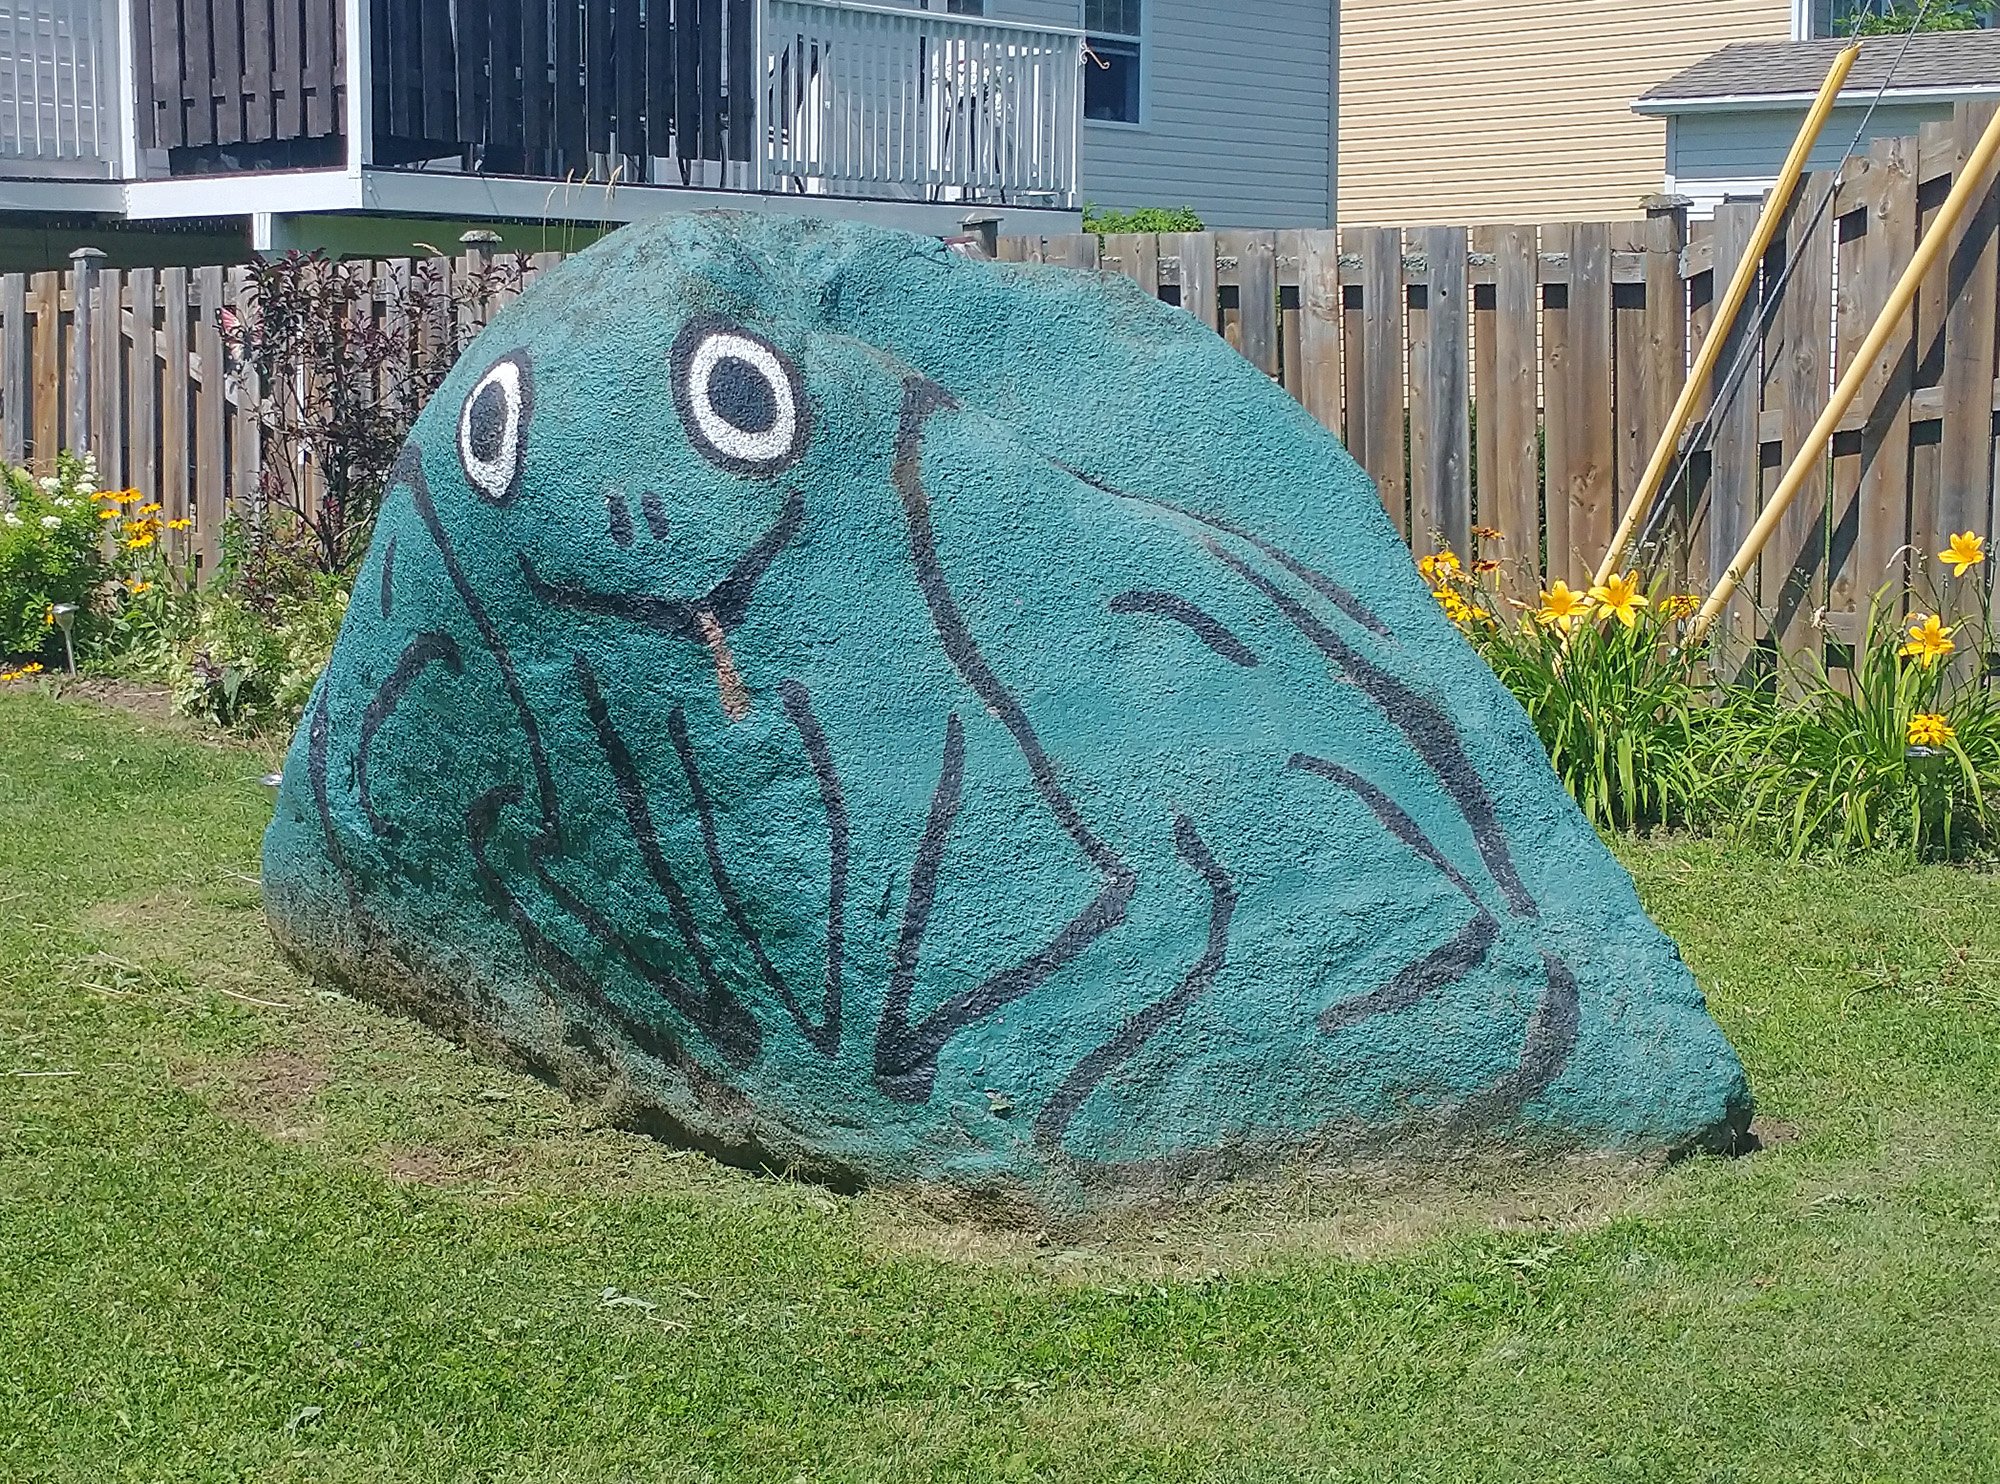 Sometimes people paint funny things on big rocks on their property or even the roads. This is a particularly good one.